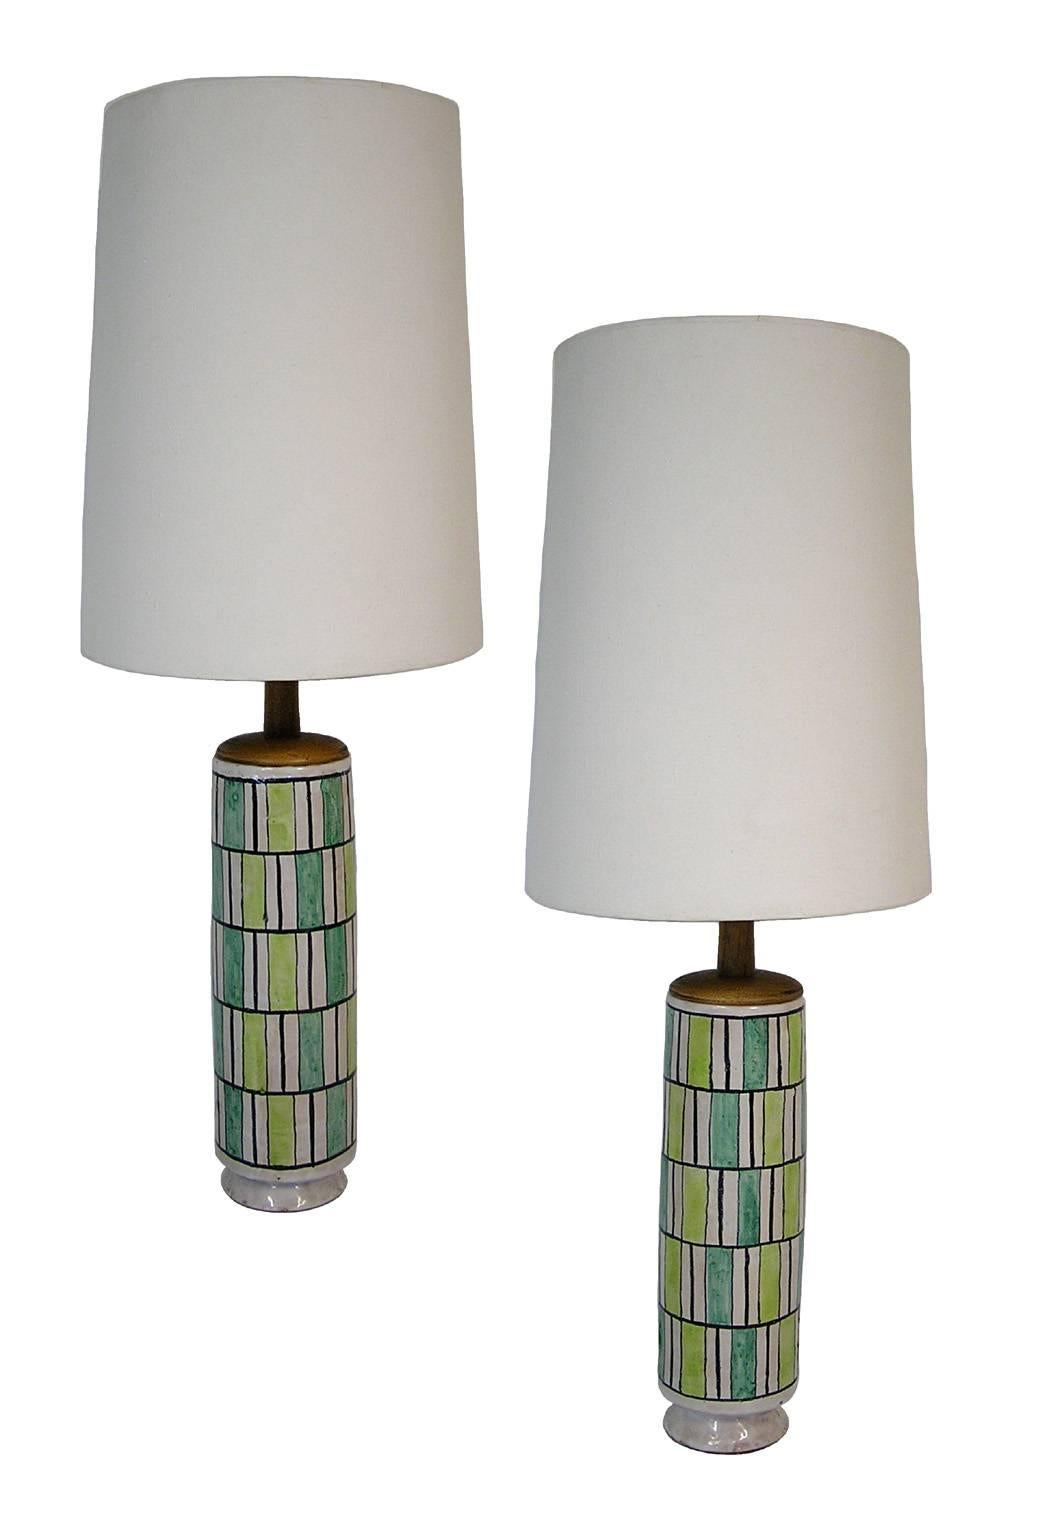 Large Pair of Italian Ceramic Table Lamps by Raymor, circa 1950s For Sale 3